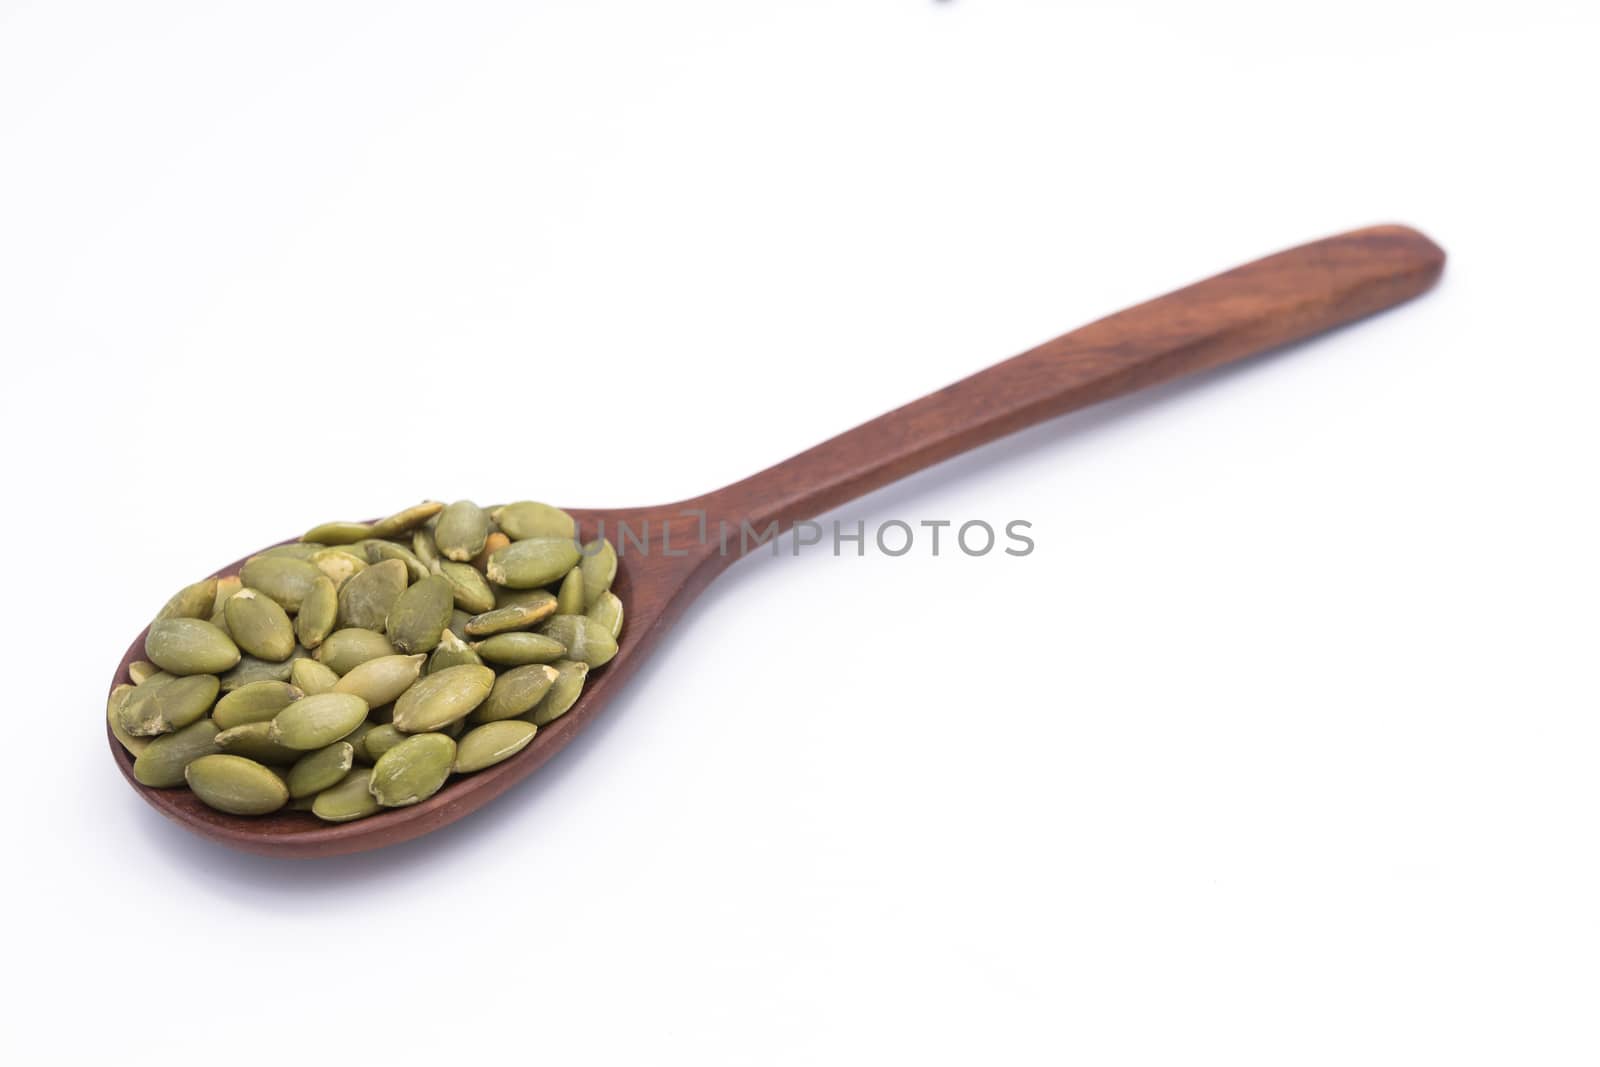 Healthy nutritional Sunflower seeds on wooden spoon